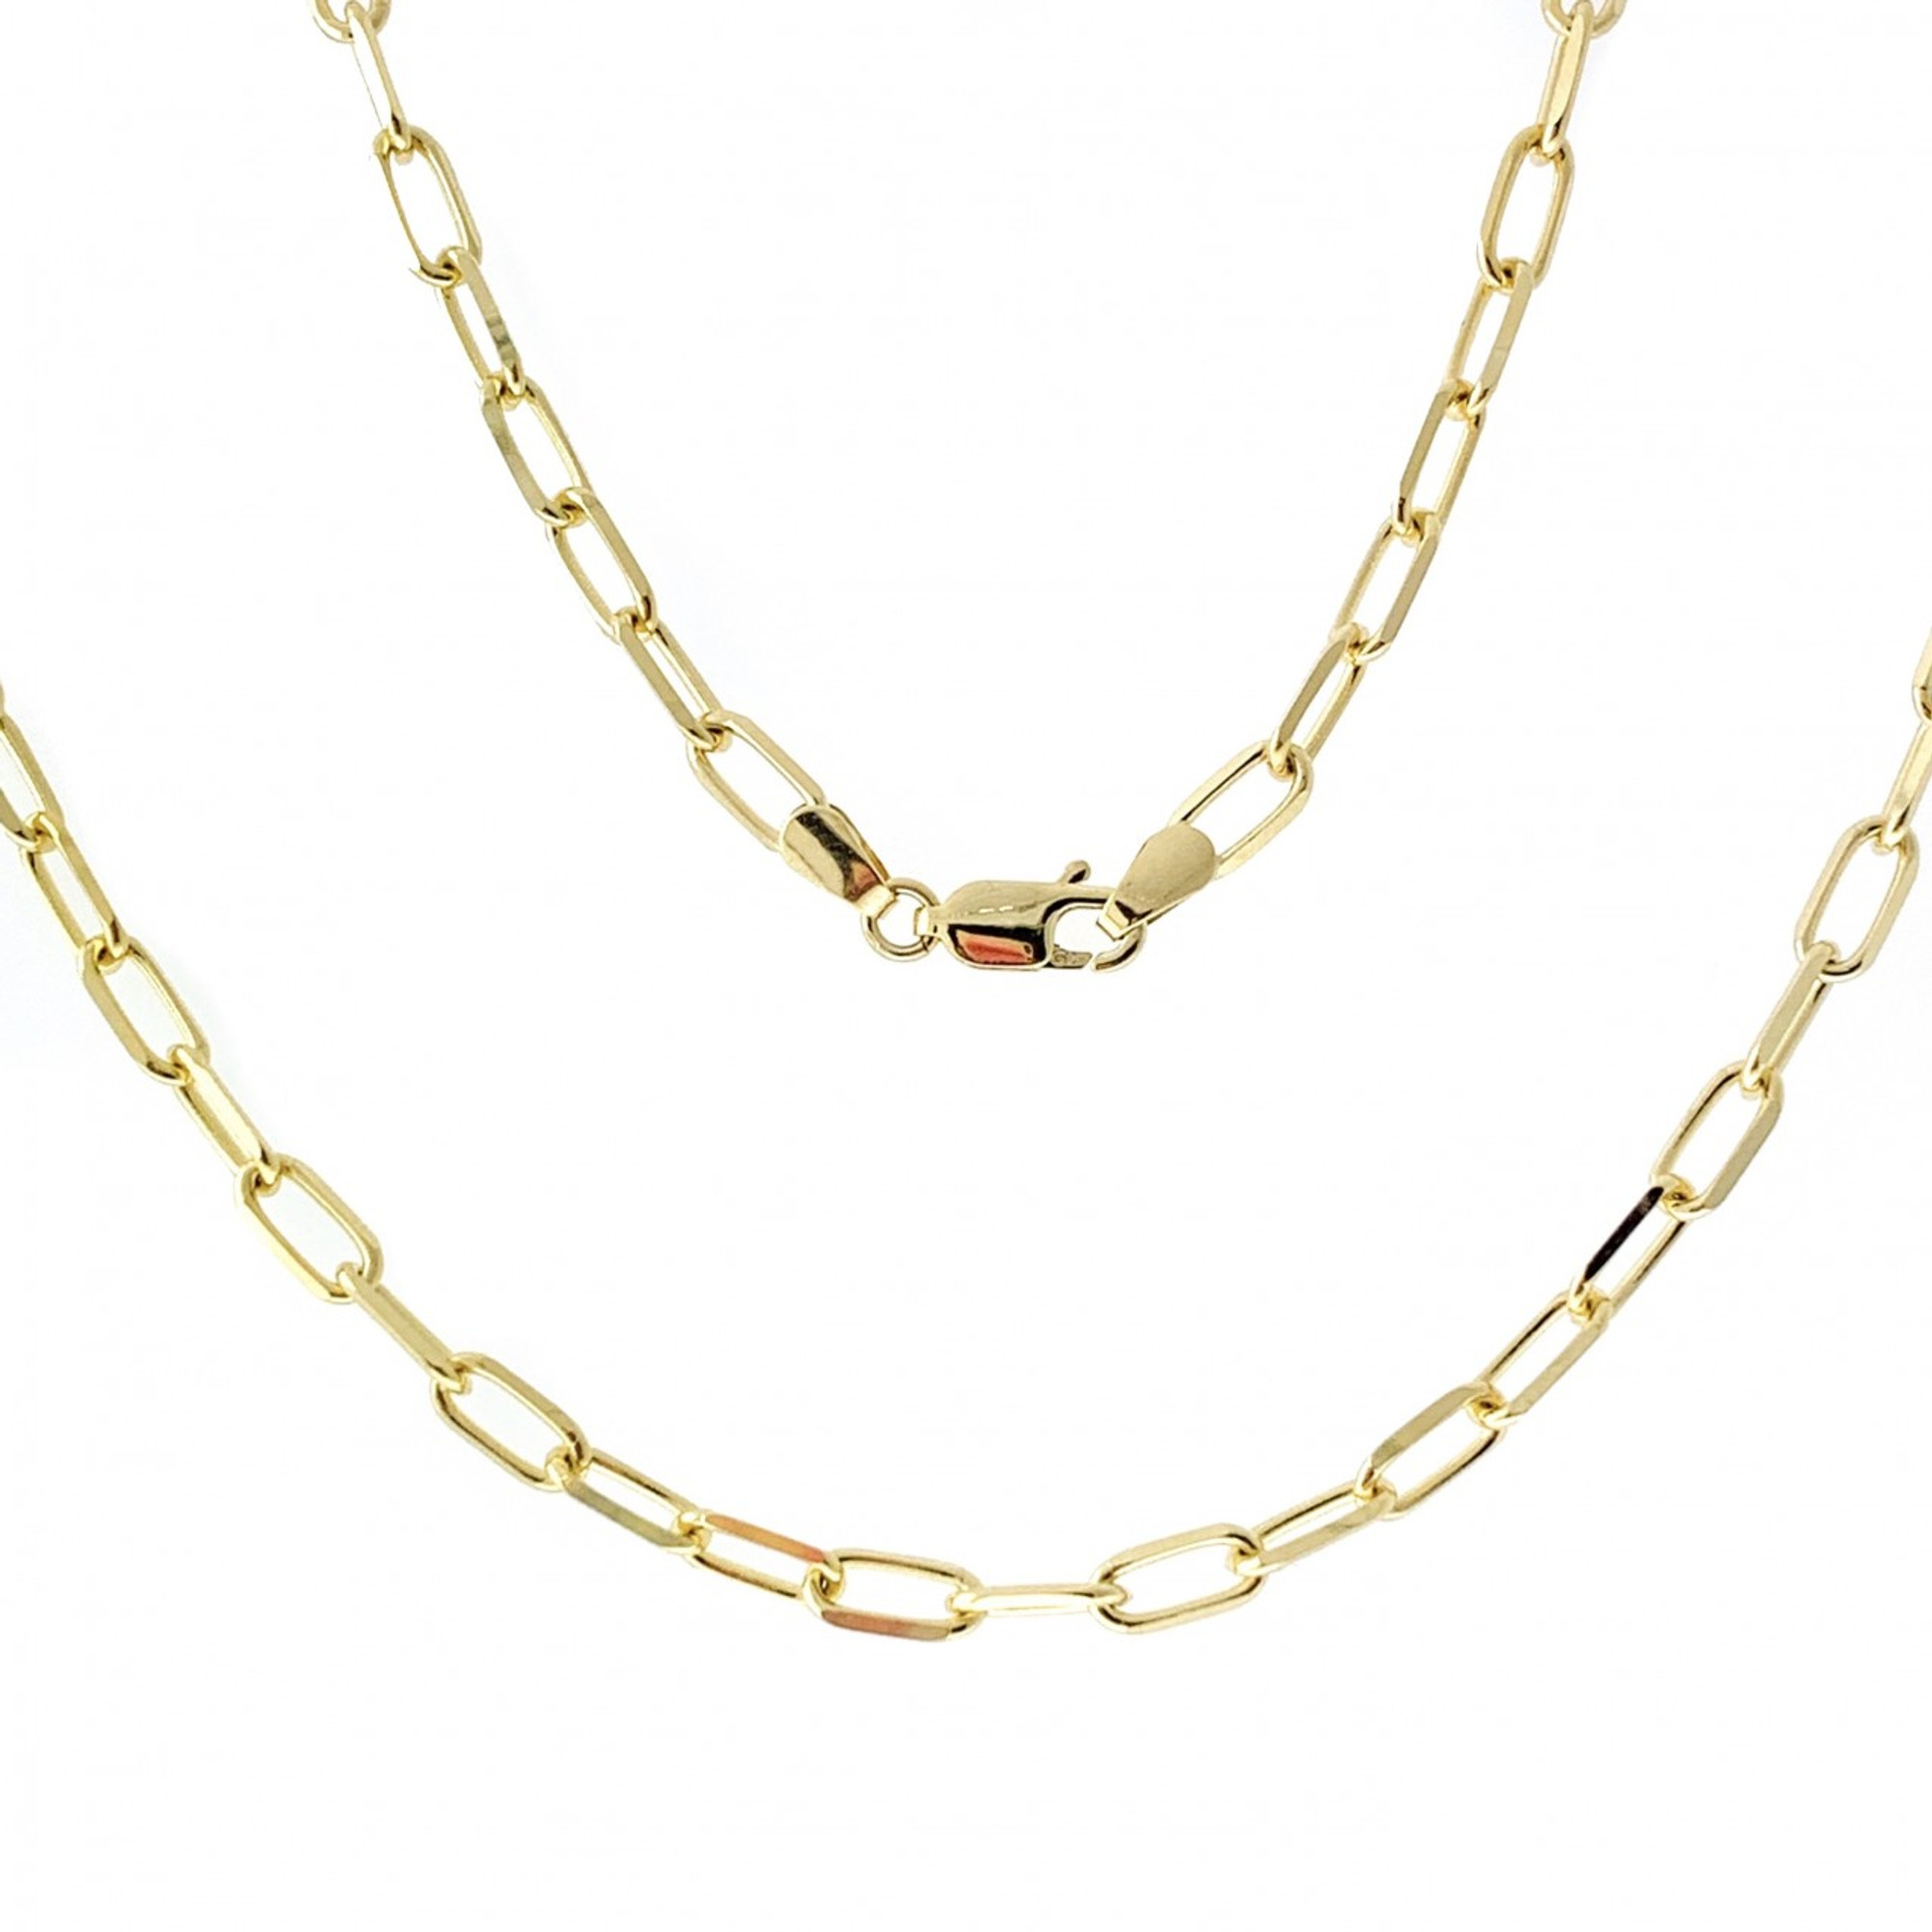 Buy Paperclip Necklace 14k Gold Online In India - Etsy India